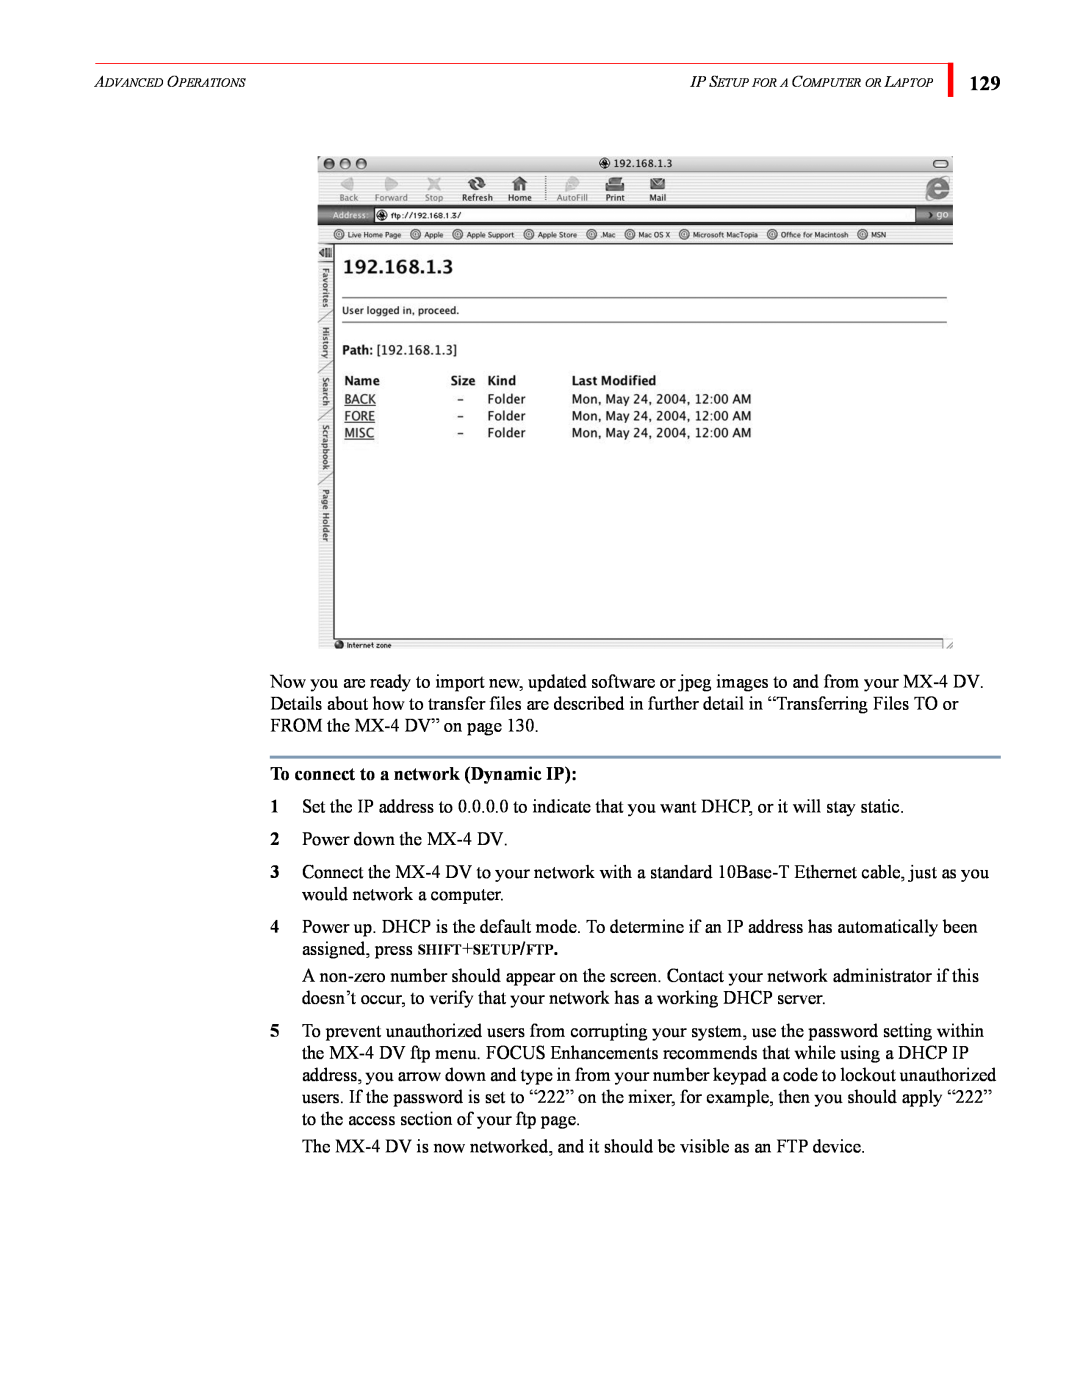 FOCUS Enhancements MX-4DV manual To connect to a network Dynamic IP 